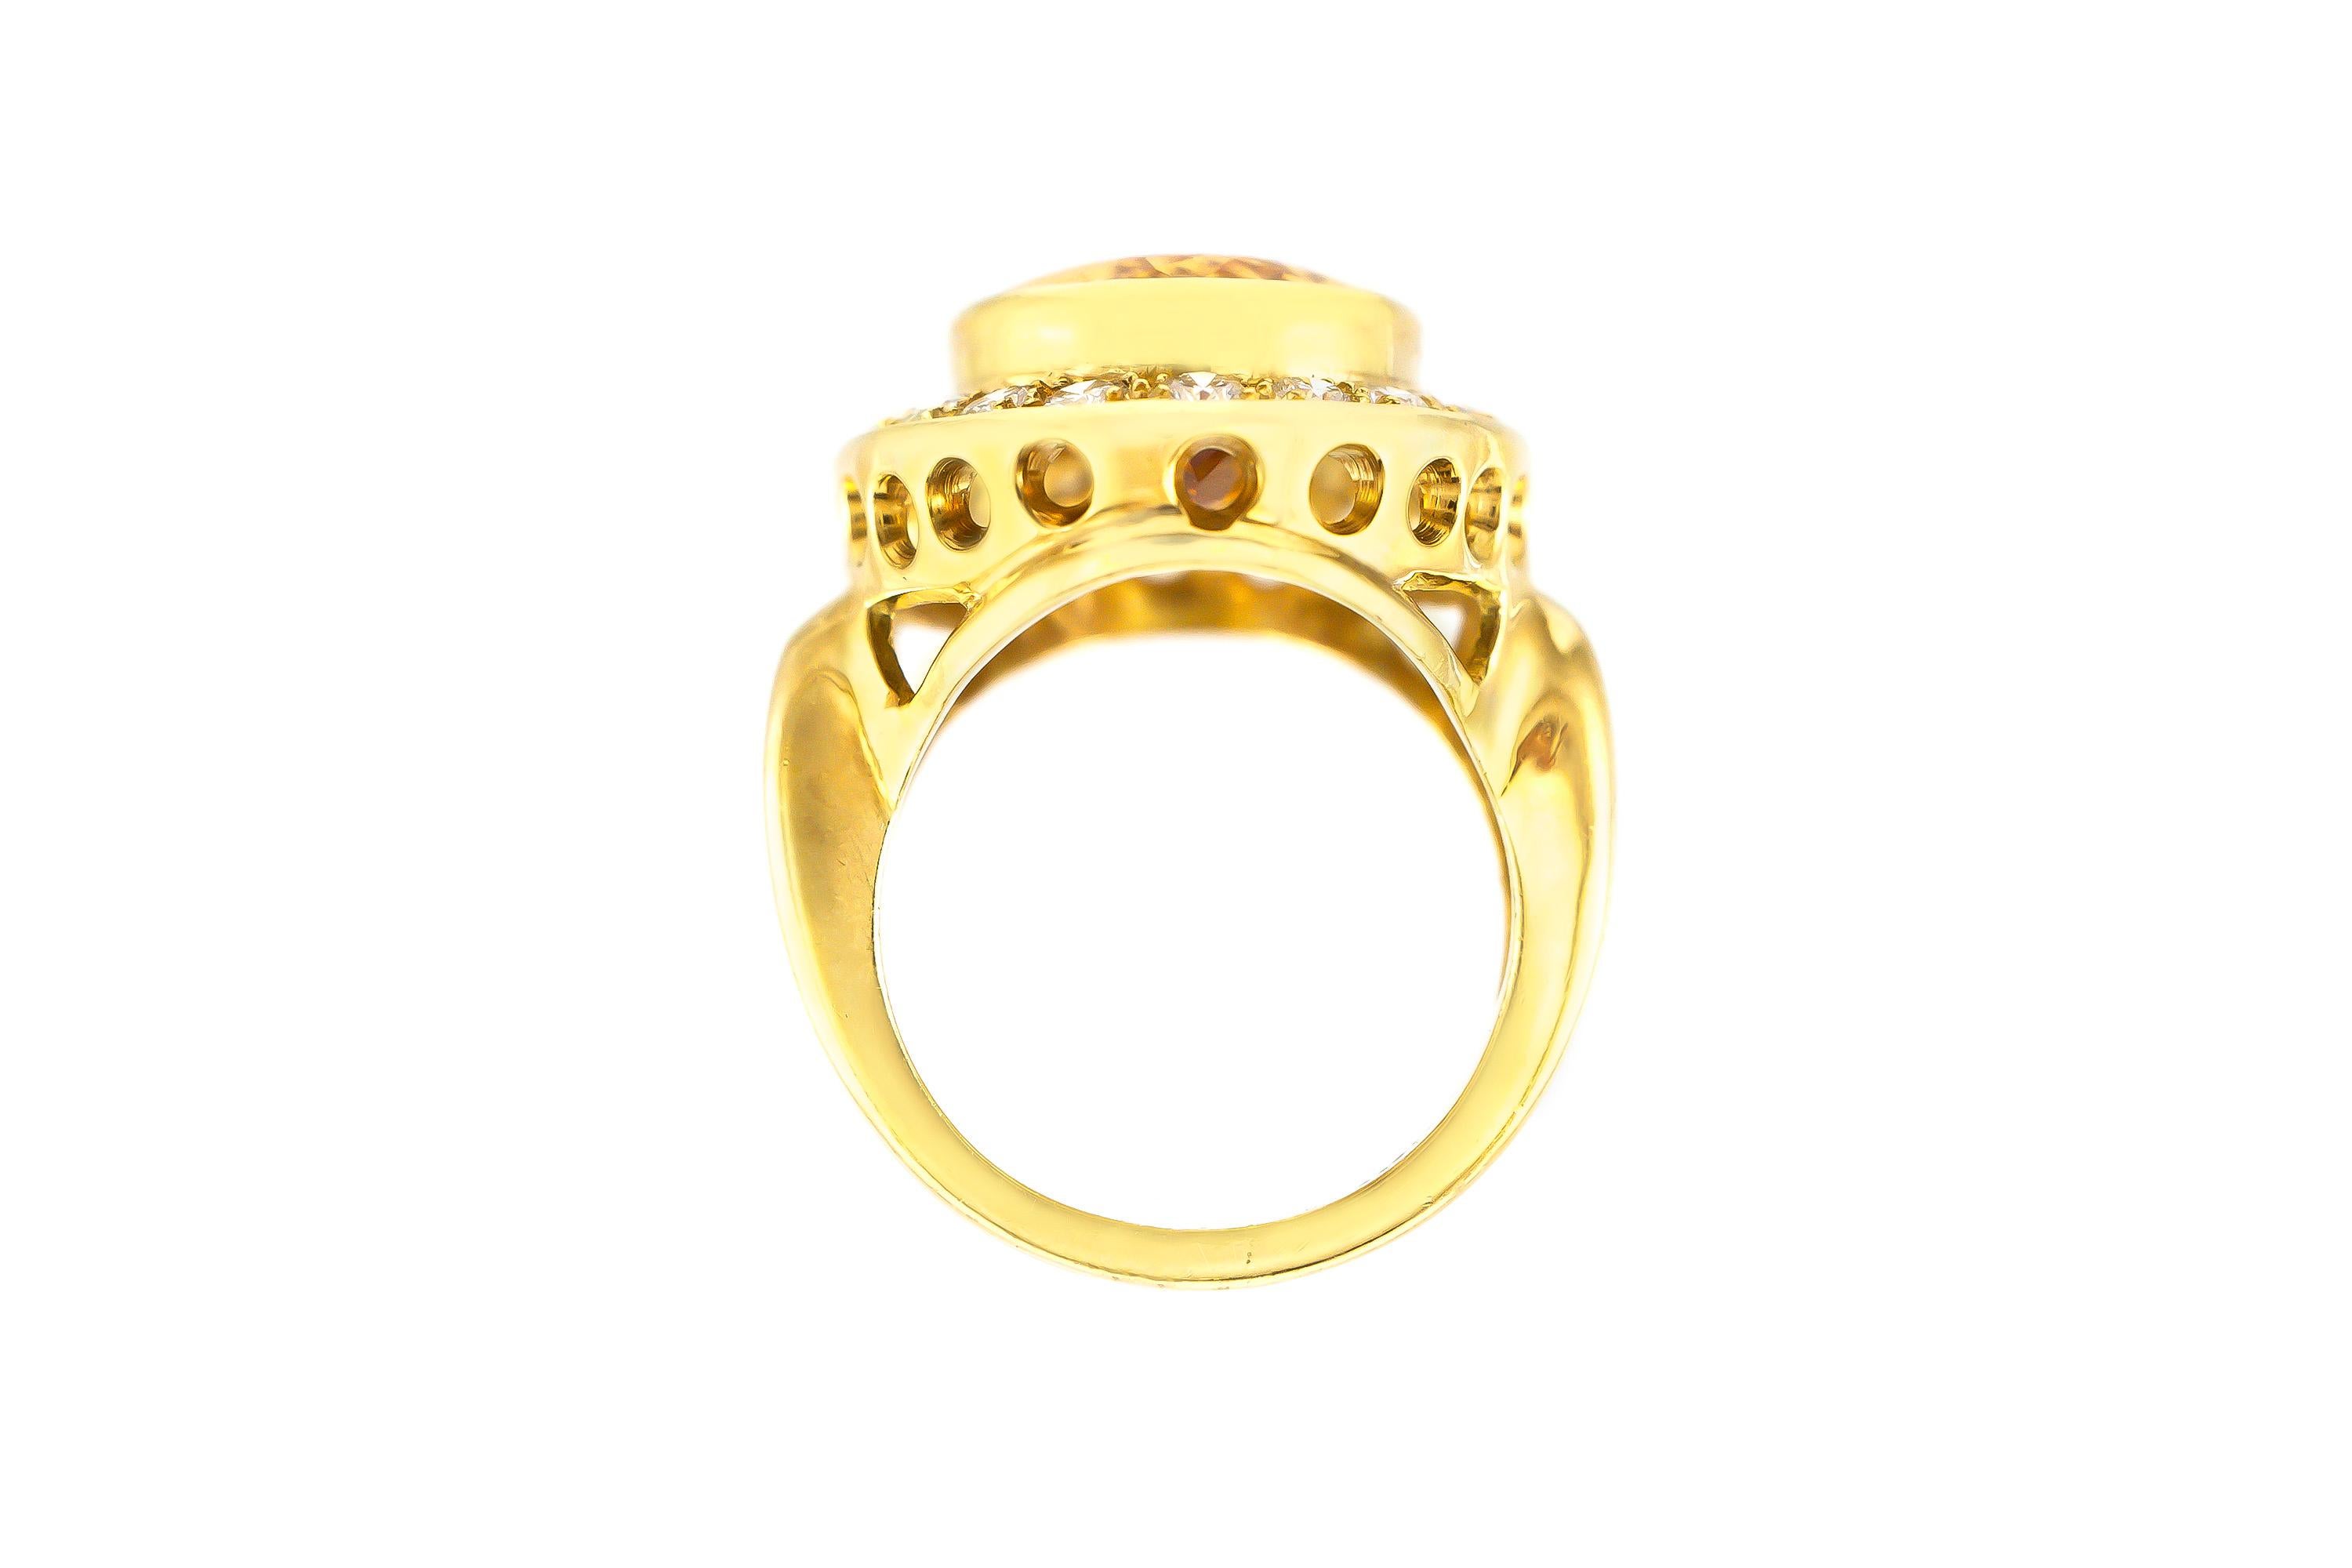 The ring is finely crafted in 18k yellow gold with citrine 8.00 carat as center stone and diamonds around that weighing approximately total of 1.60 carat.
Circa 1940.
